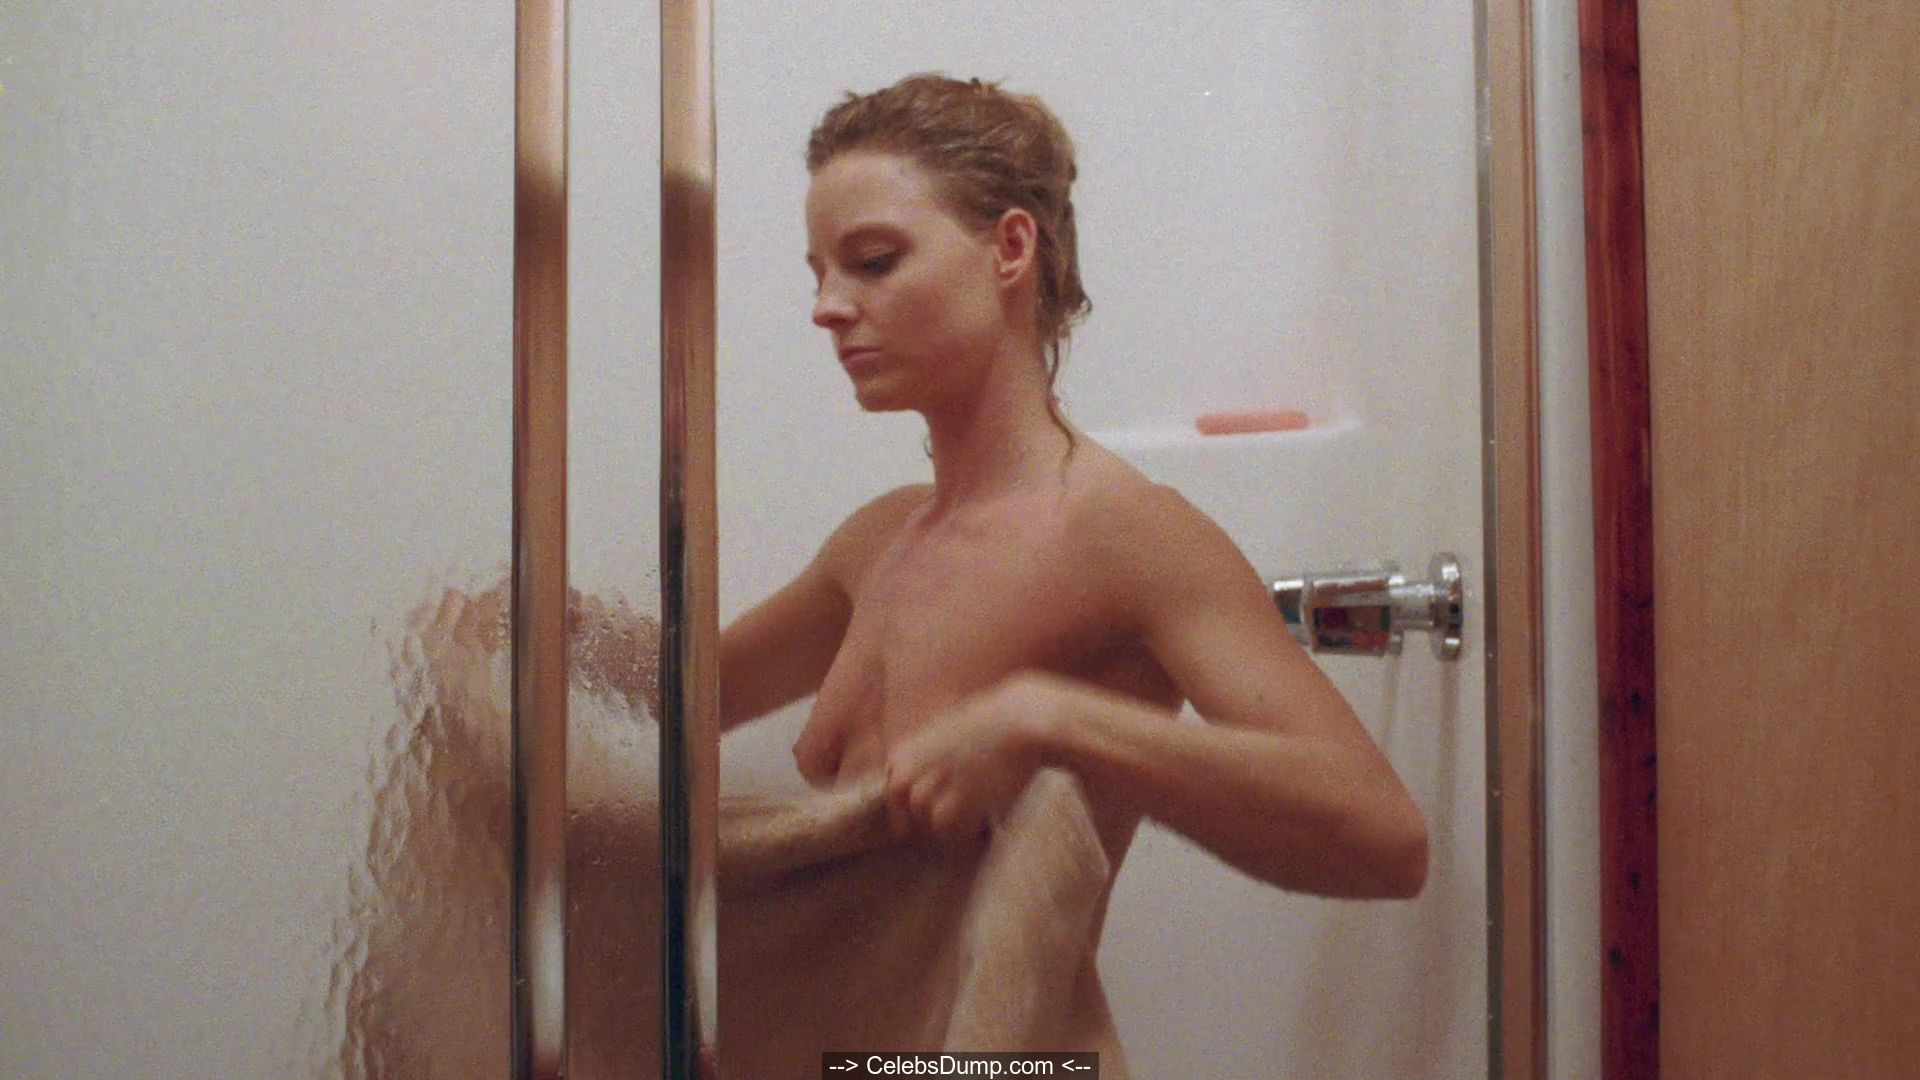 Jodie Foster nude tits in Catchfire (1991) .